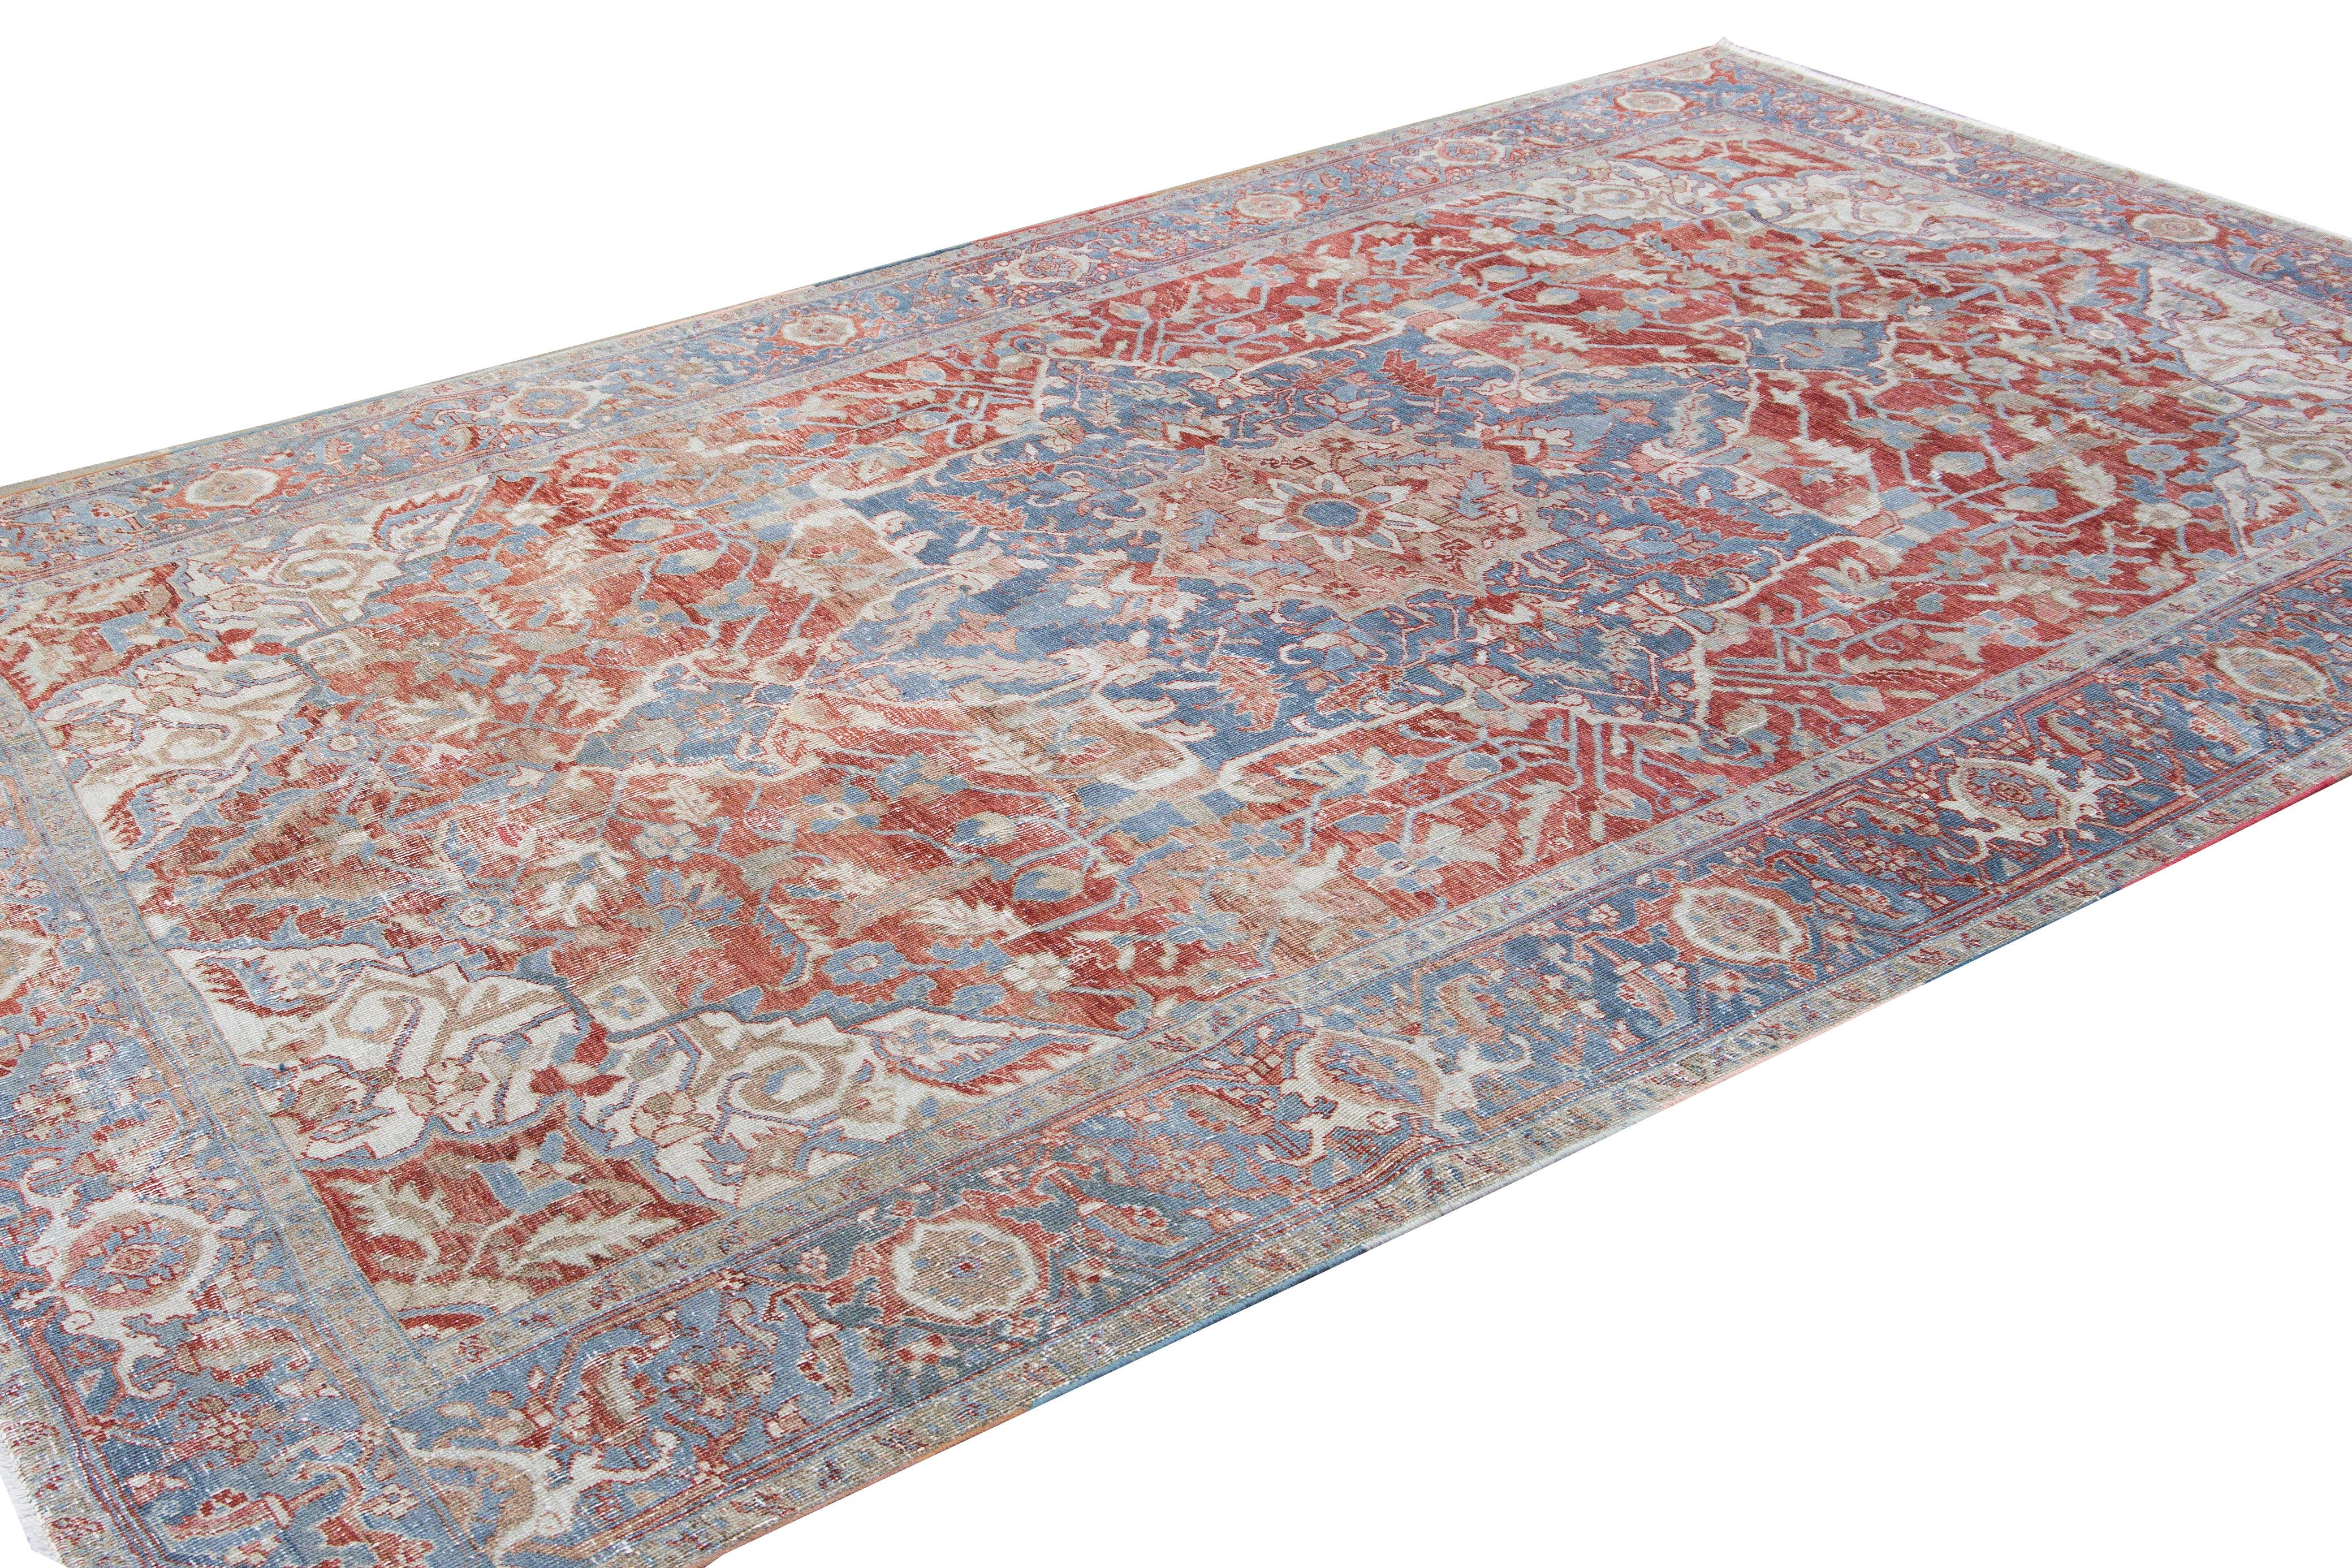 Antique Persian Heriz Handmade Red and Blue Medallion Floral Wool Rug In Distressed Condition For Sale In Norwalk, CT